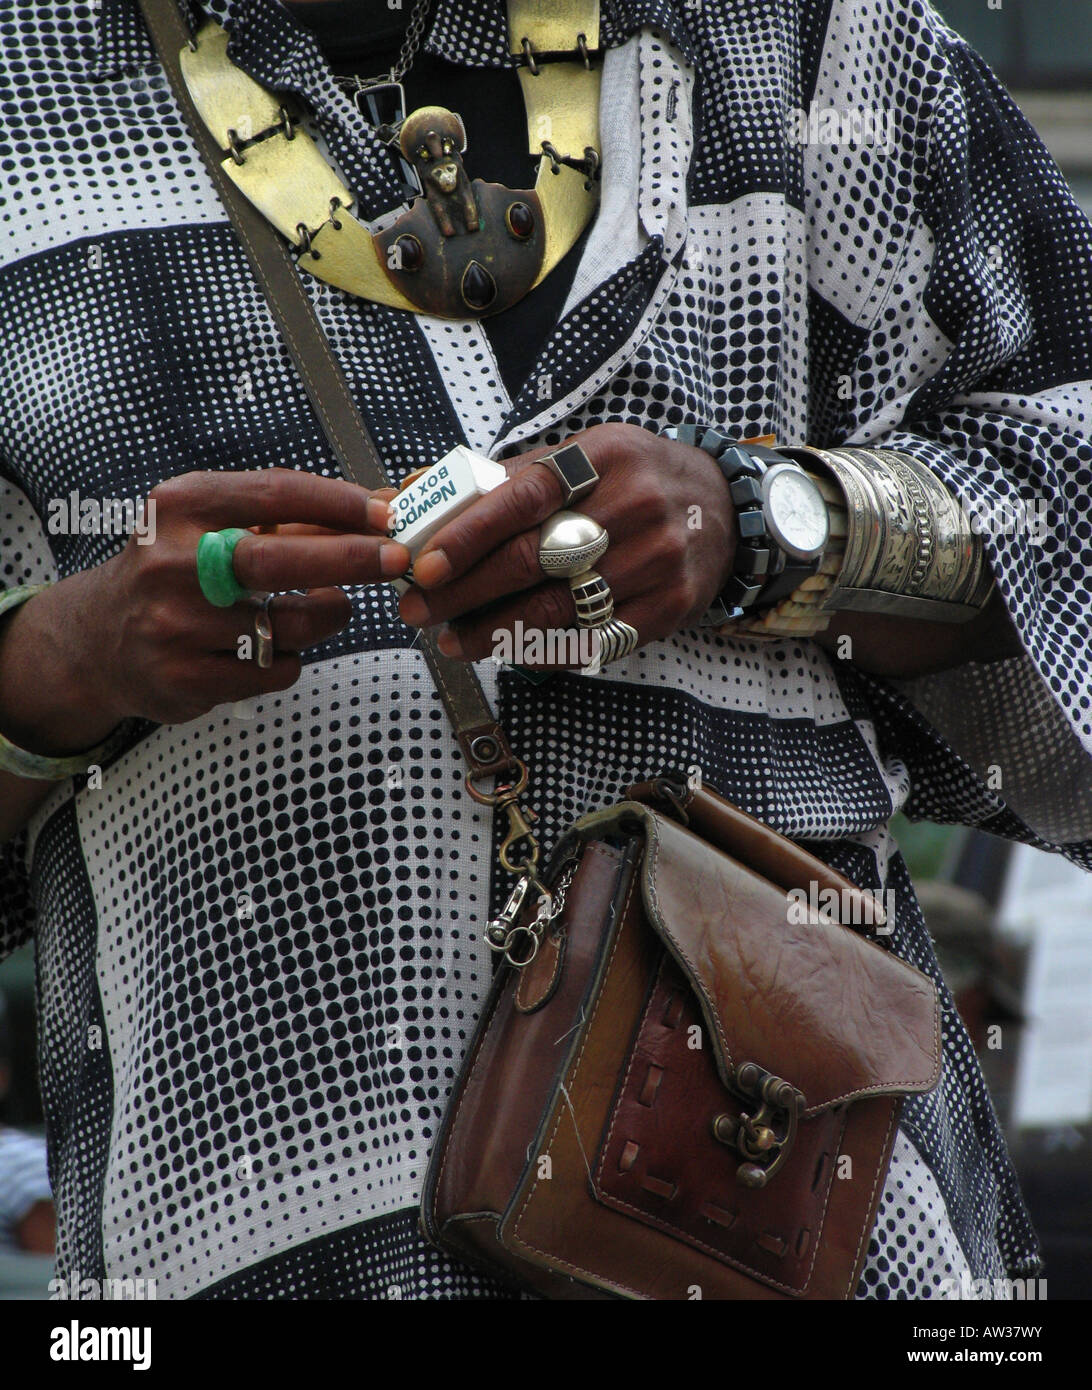 Black man with conspicuous bracelets and other jewelery and leather bag, USA, Harlem, New York Stock Photo